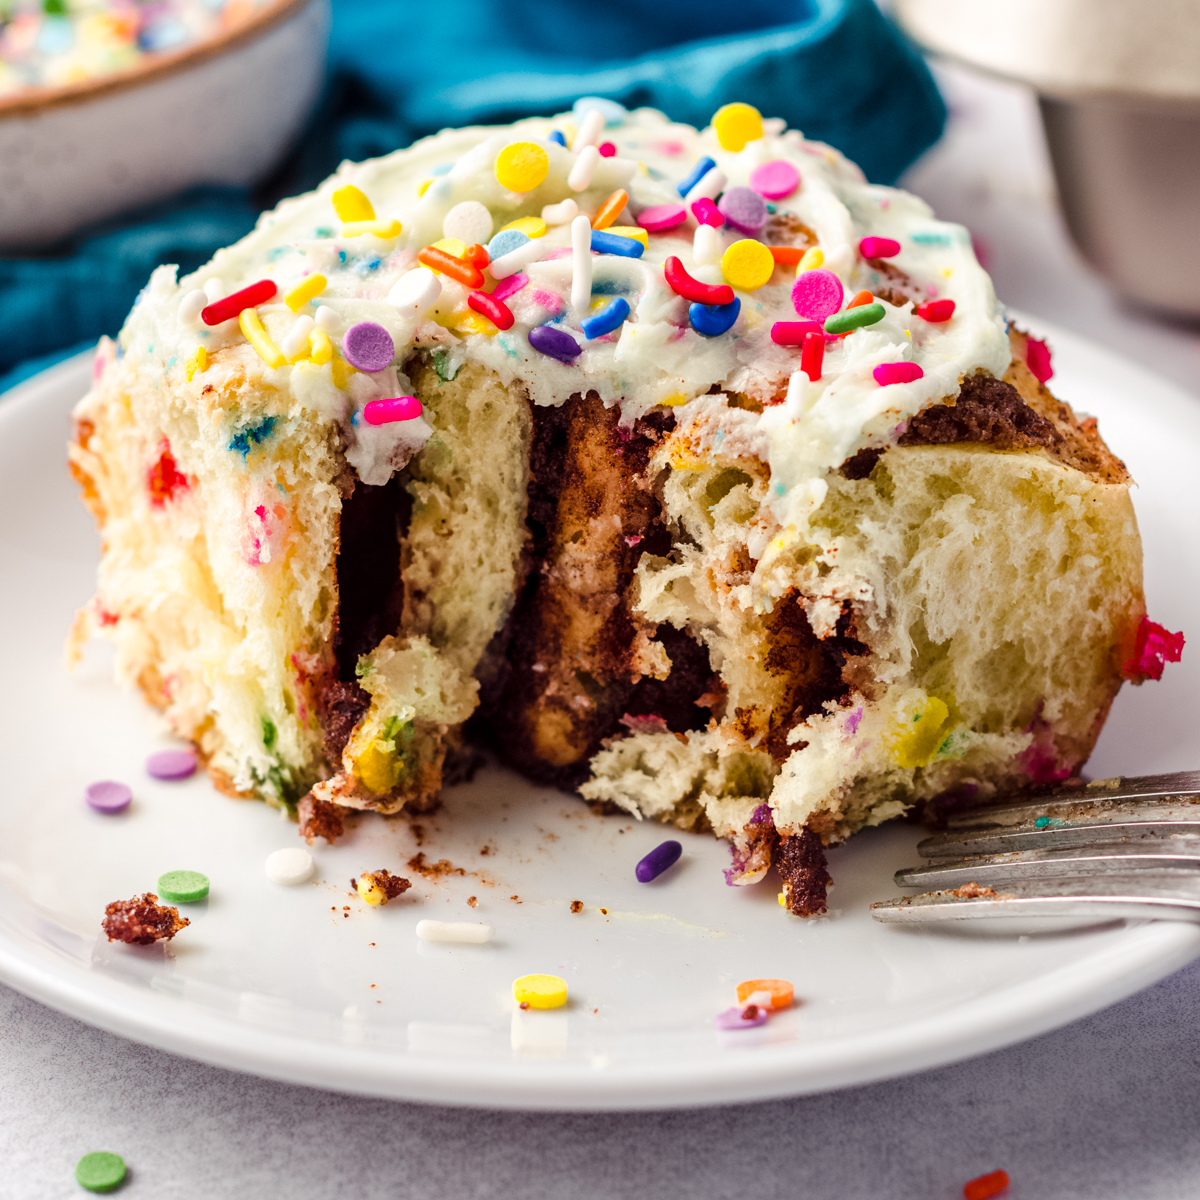 A funfetti cinnamon roll on a plate with a bite taken out of the roll.